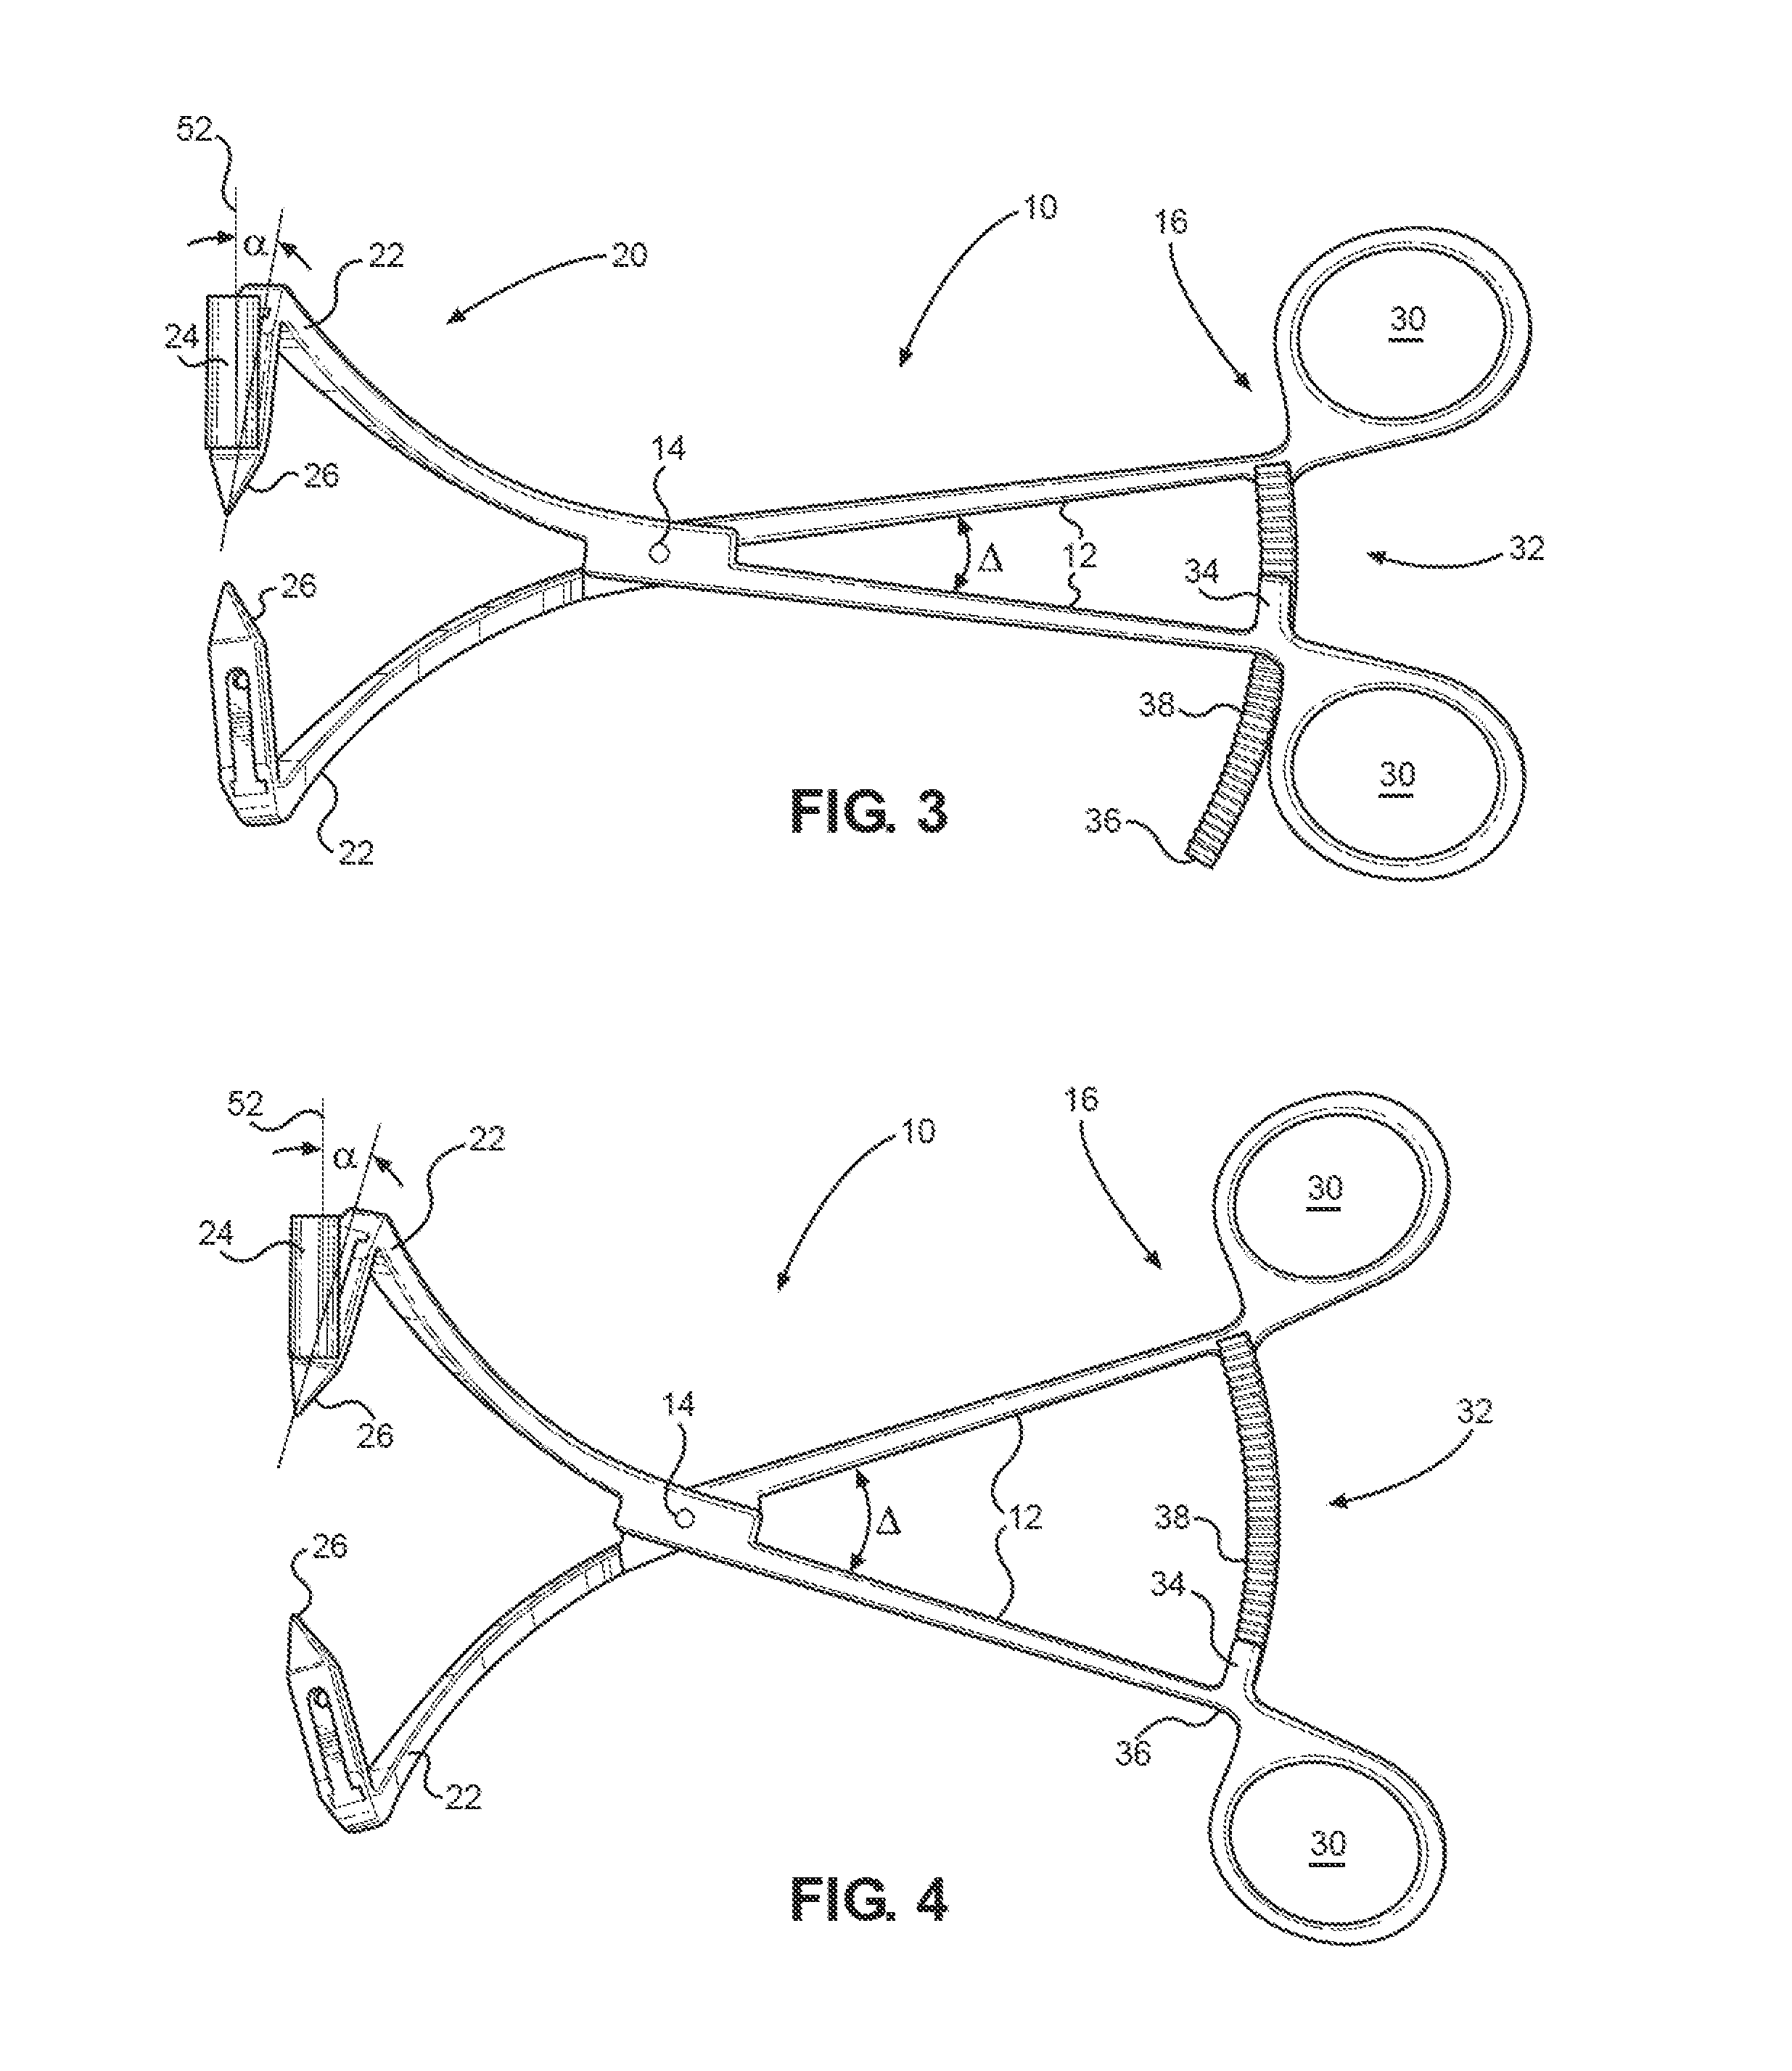 Surgical instrument with movable guide and sleeve